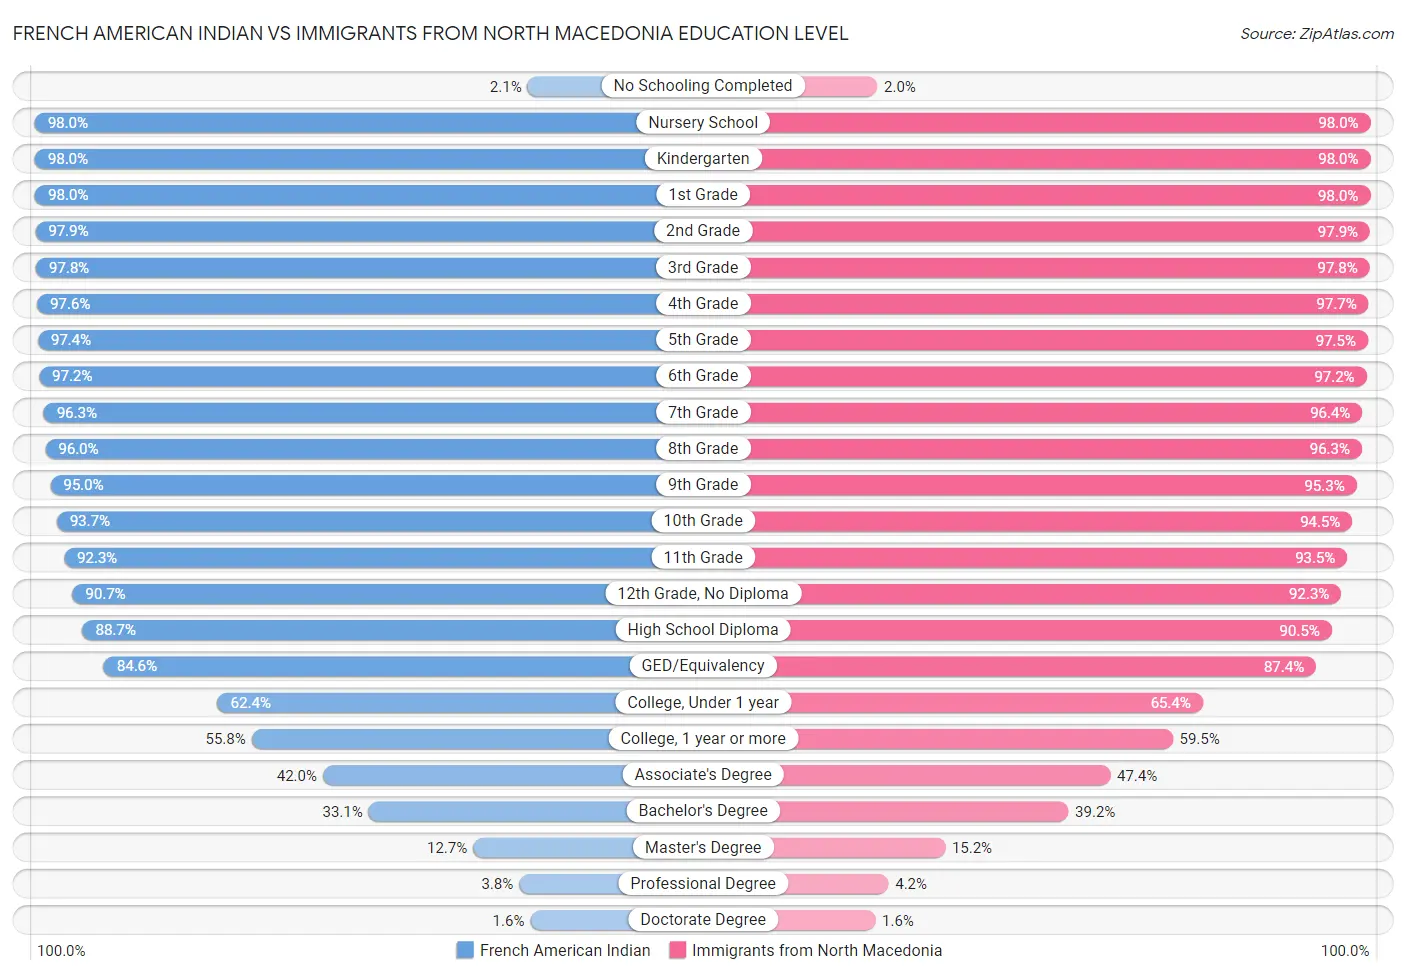 French American Indian vs Immigrants from North Macedonia Education Level